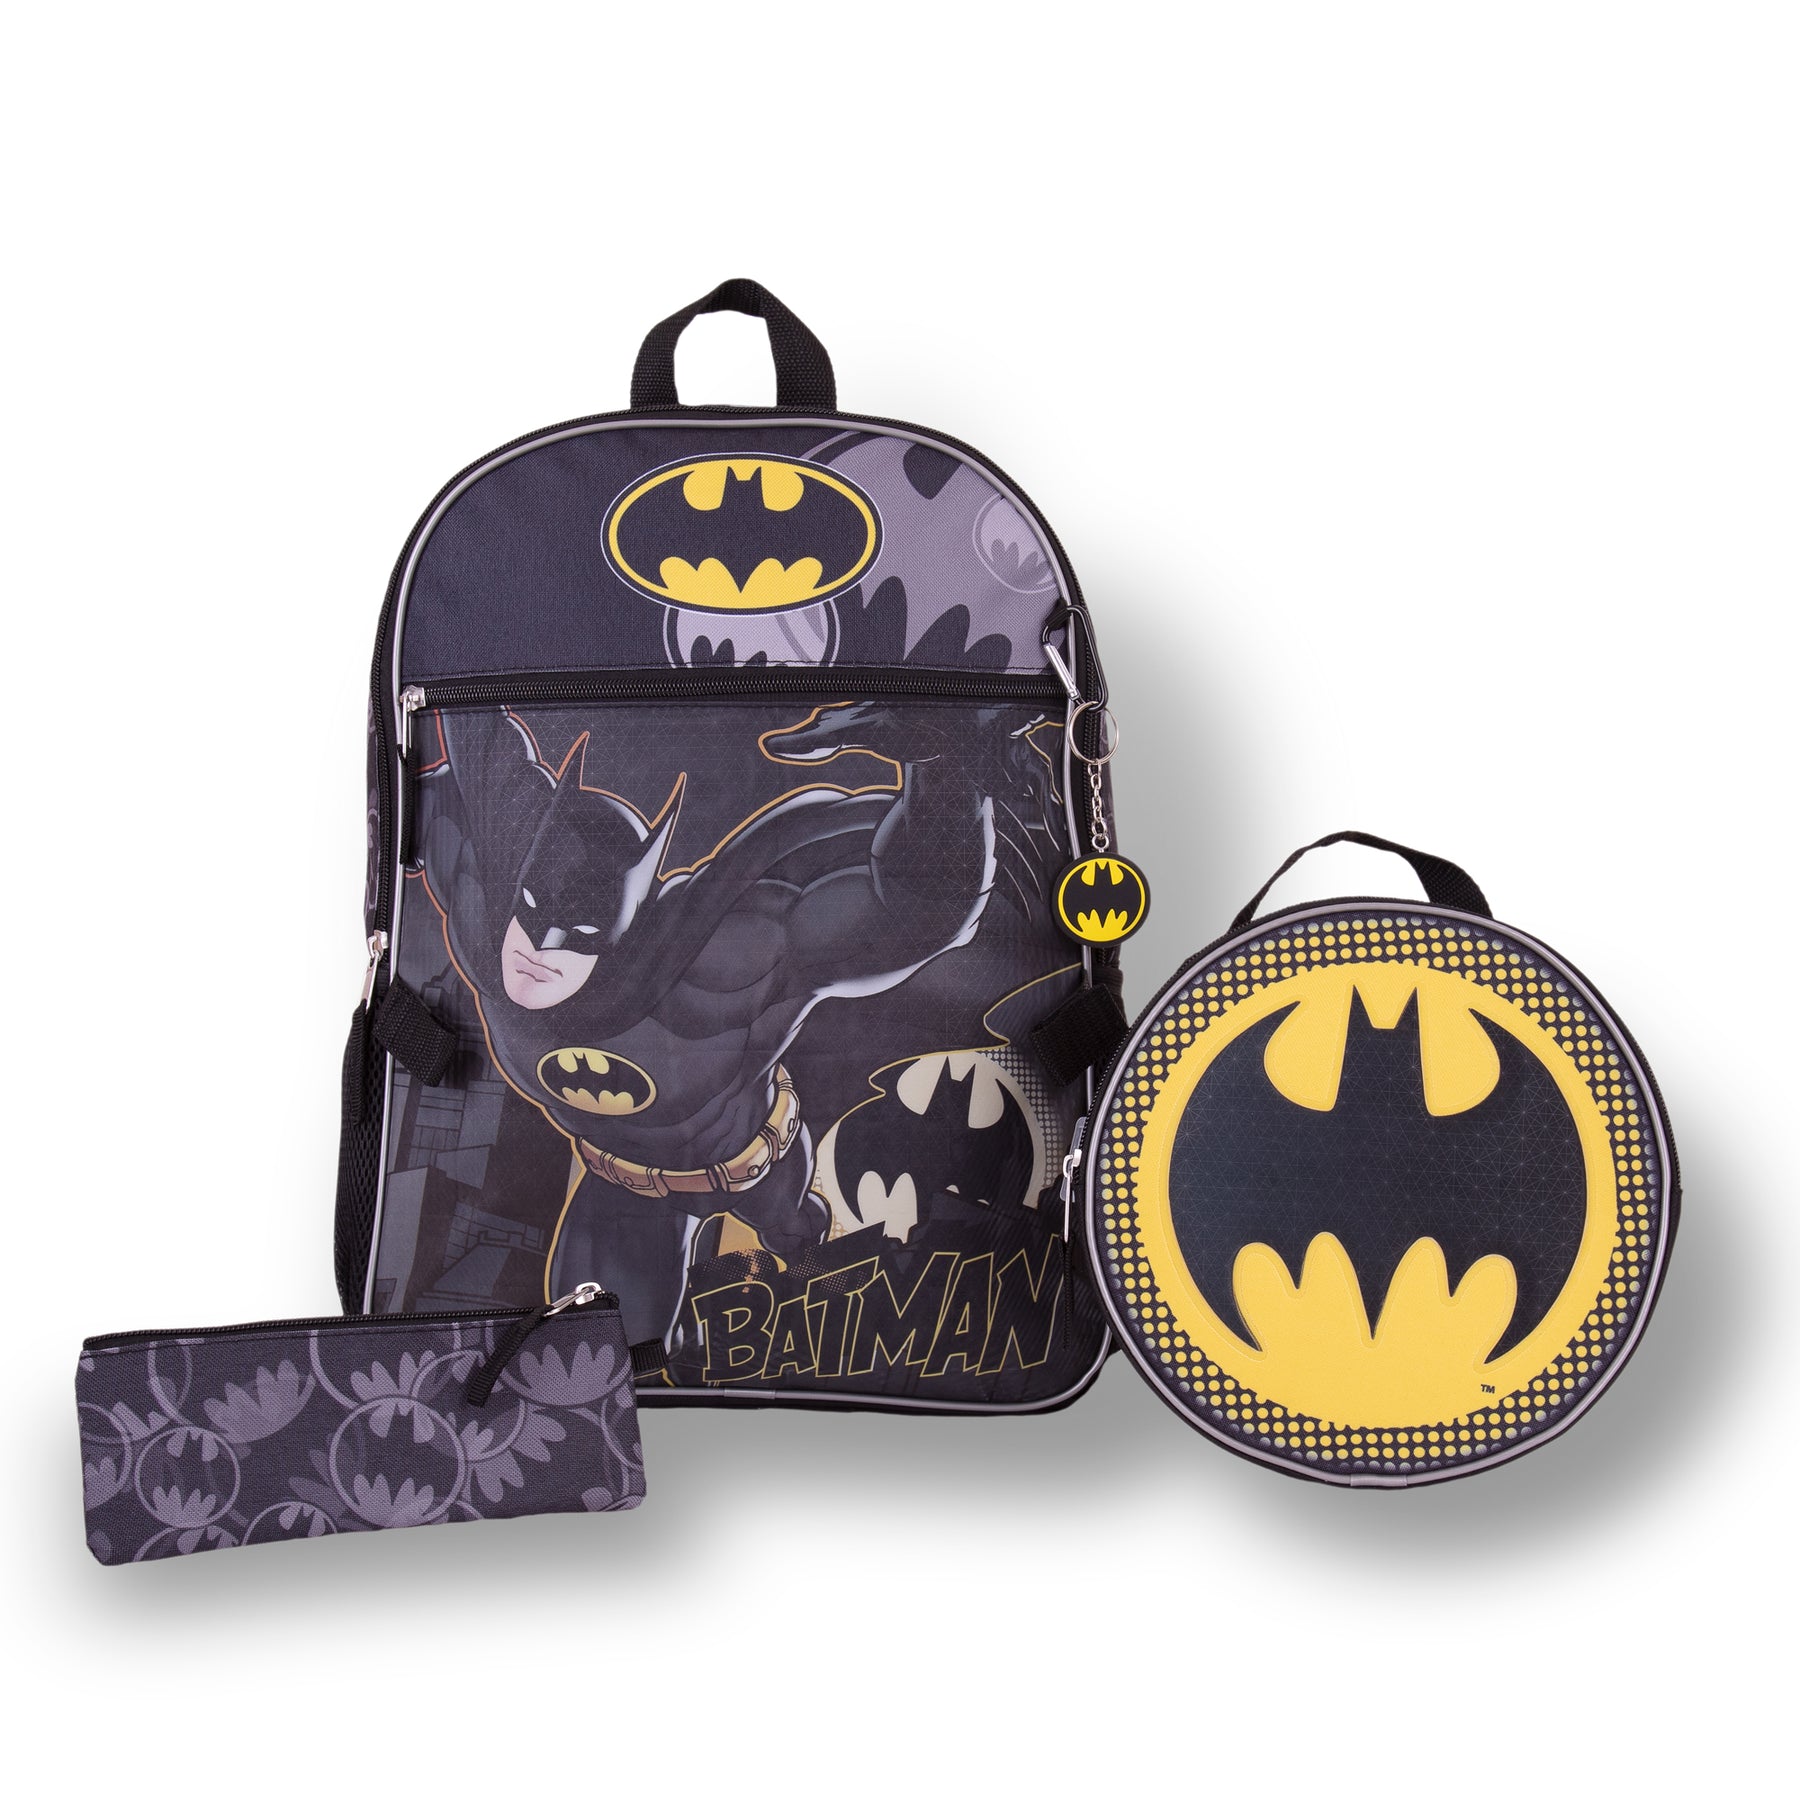 Batman Backpack With Lunch Bag Kids Back To School 4 Piece Set